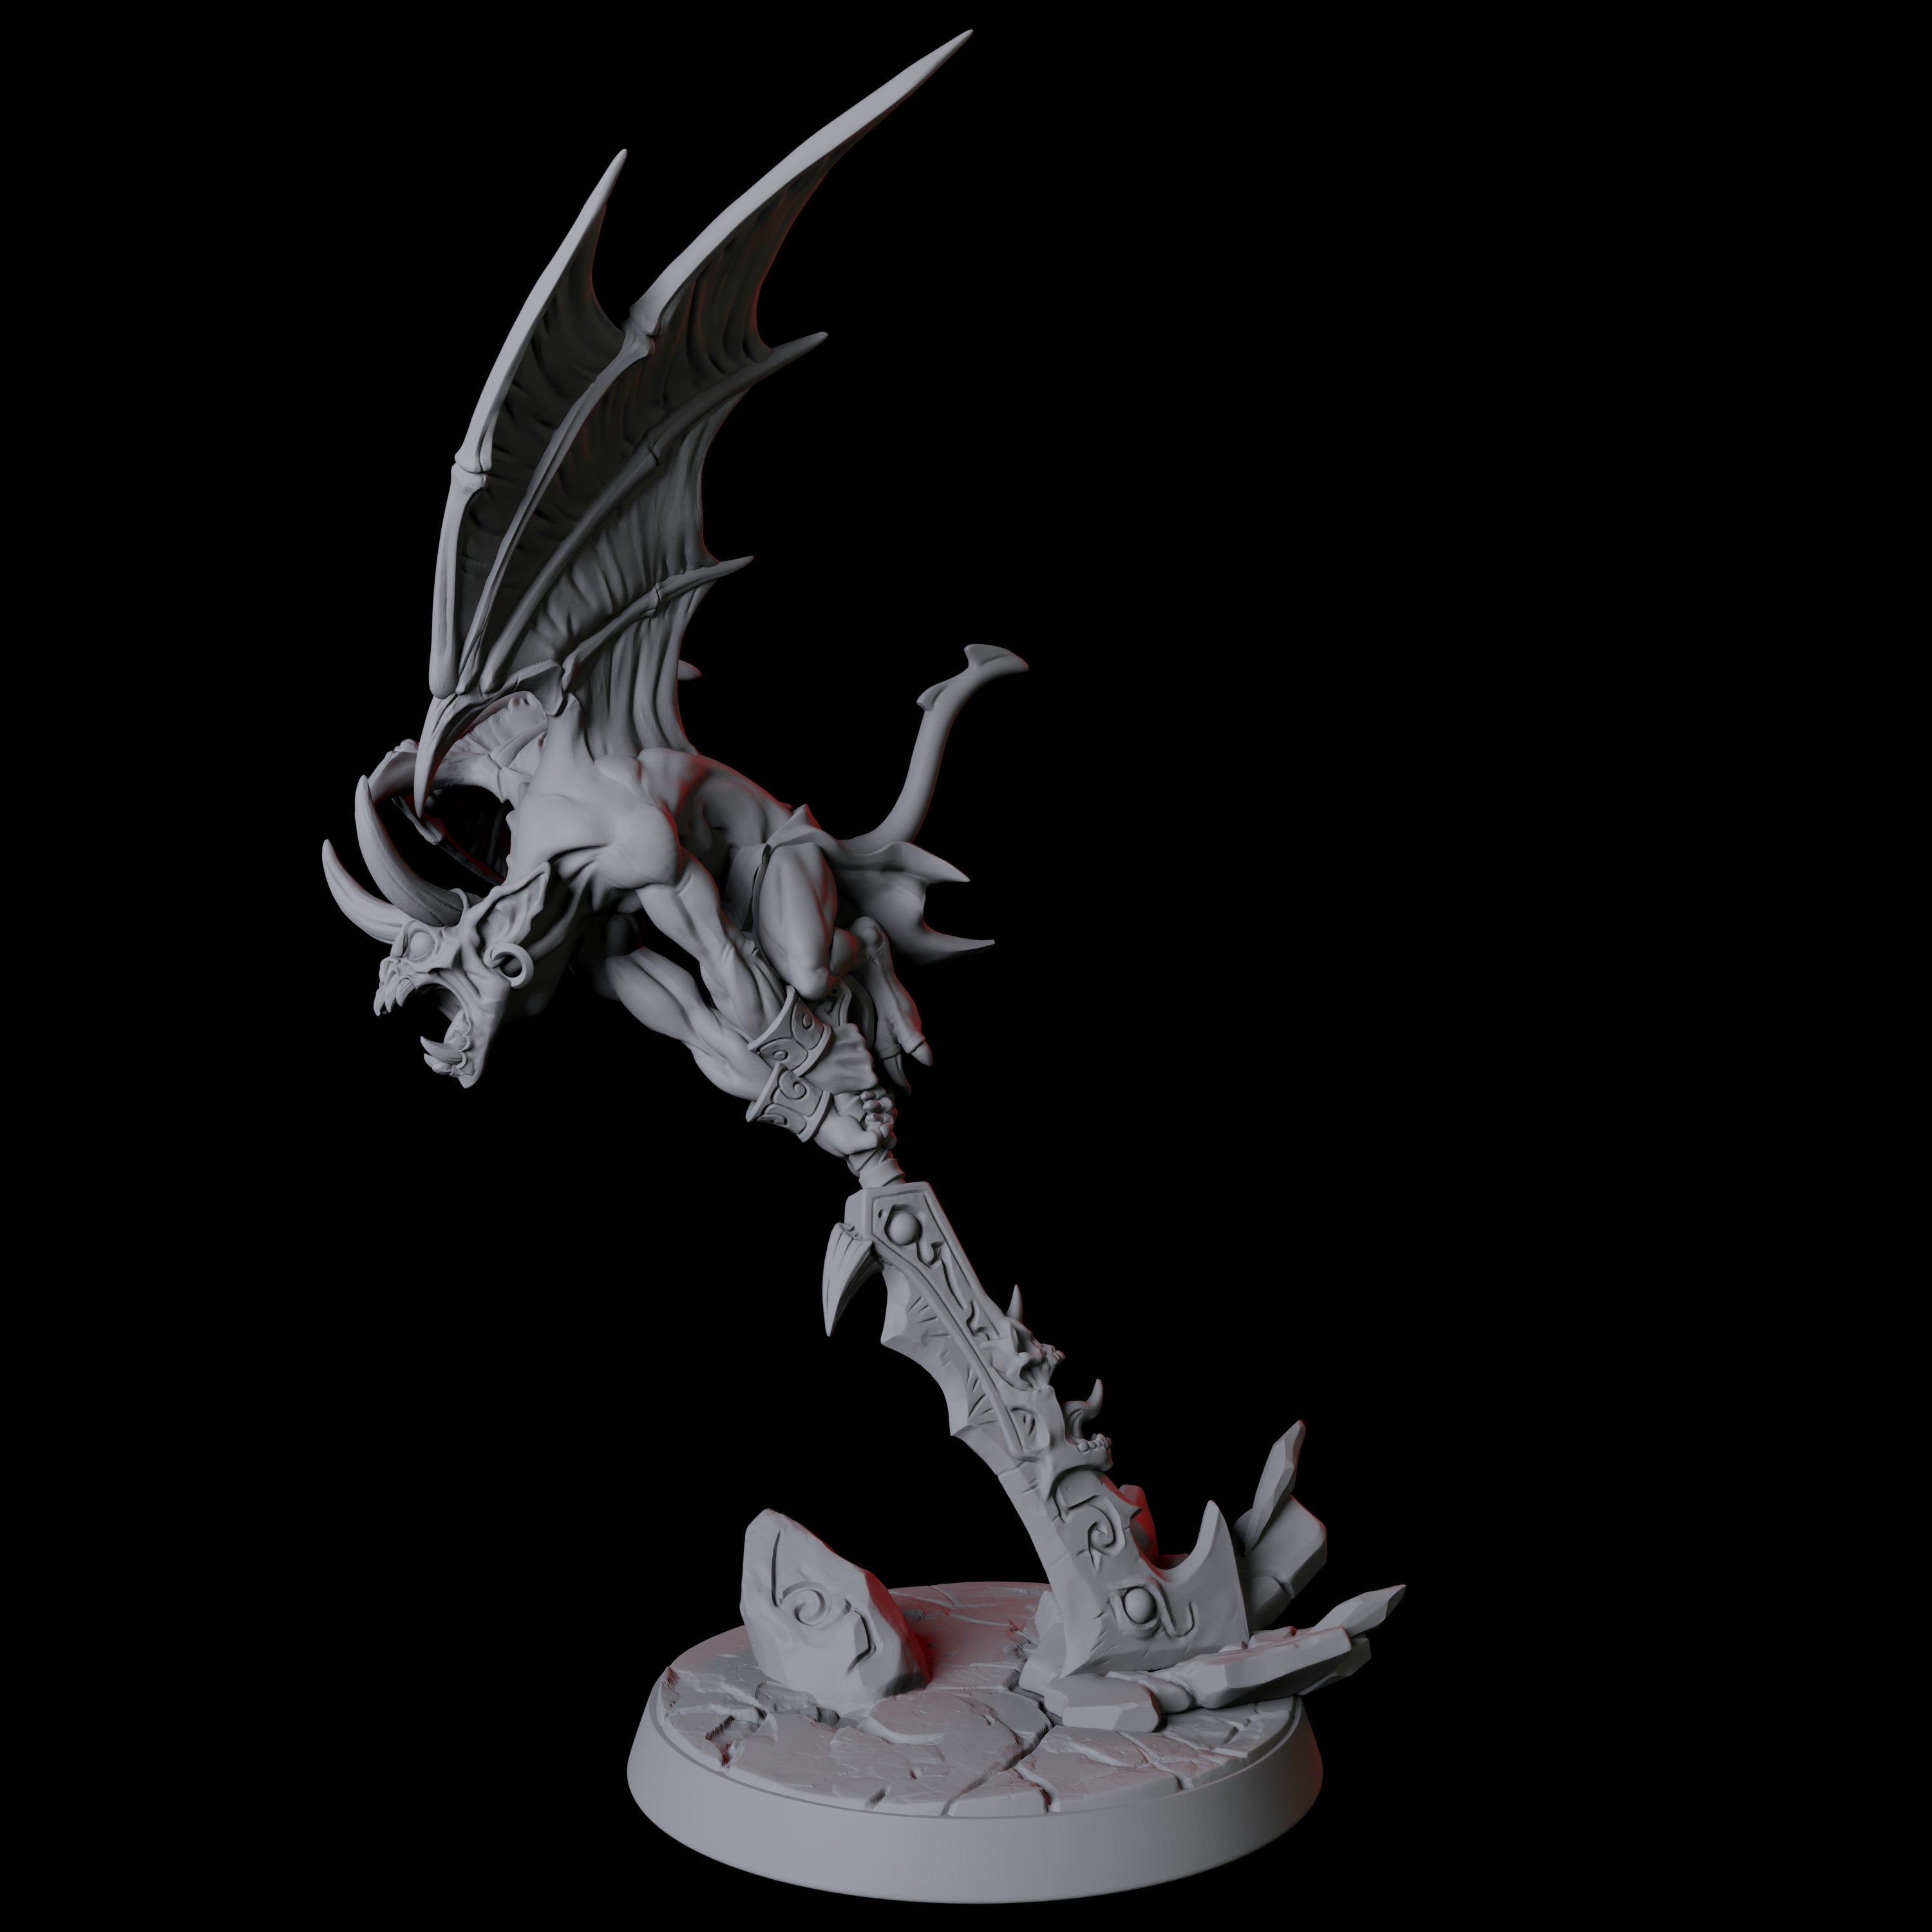 Four Devil Imps Miniature for Dungeons and Dragons